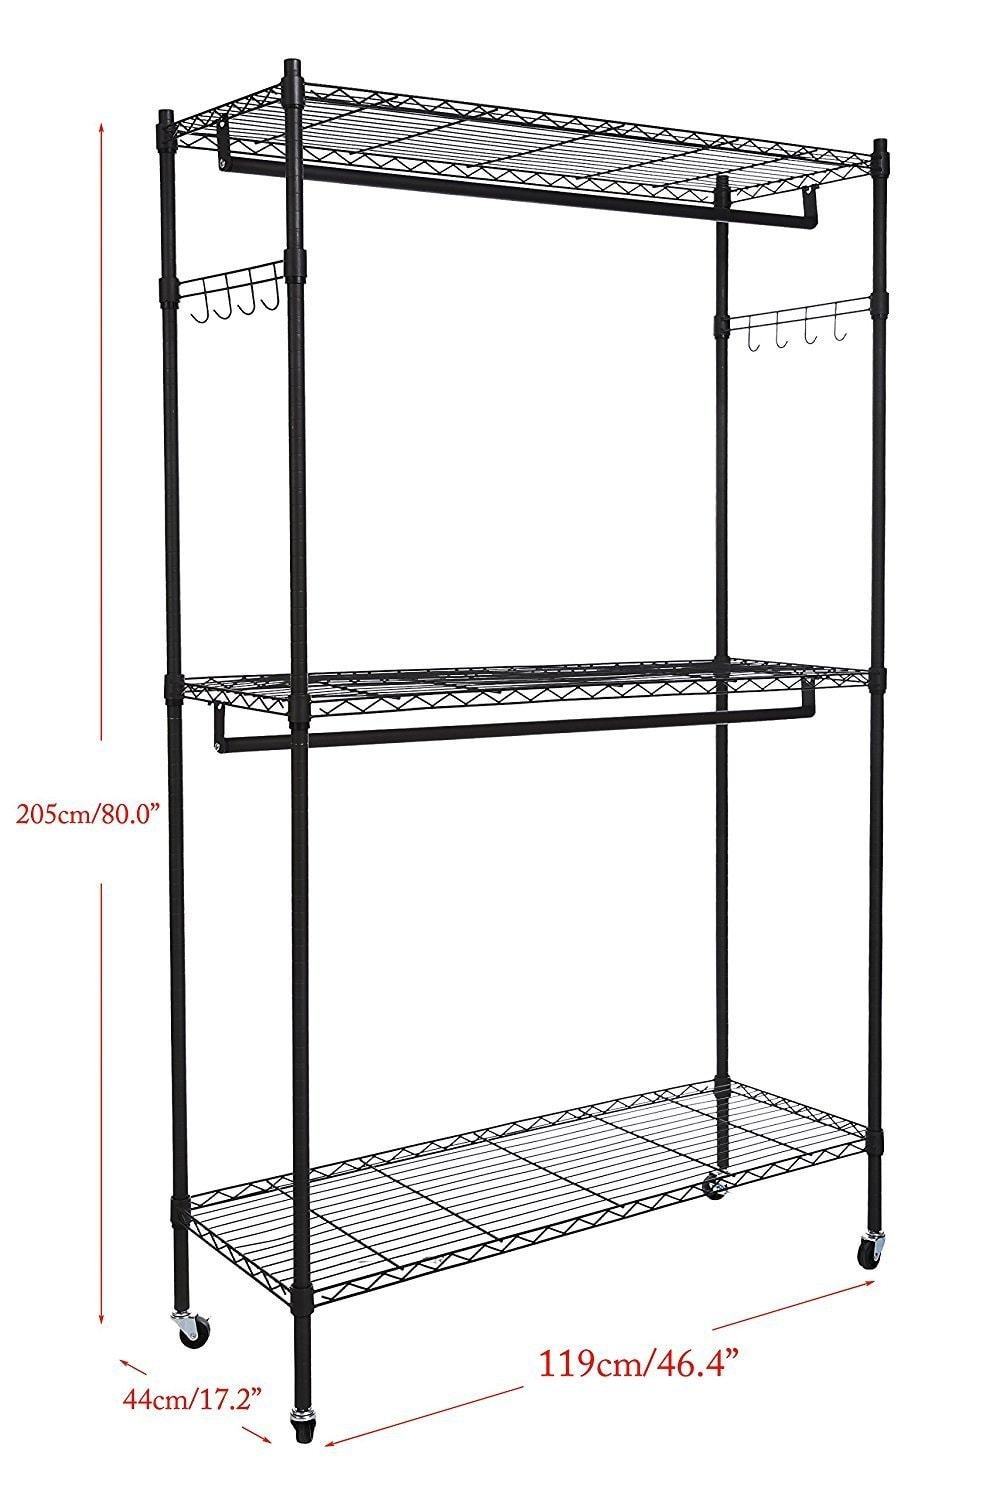 Great hindom free standing closet garment rack with wheels and side hooks 3 tiers large size heavy duty rolling clothes rack closet storage organizer us stock